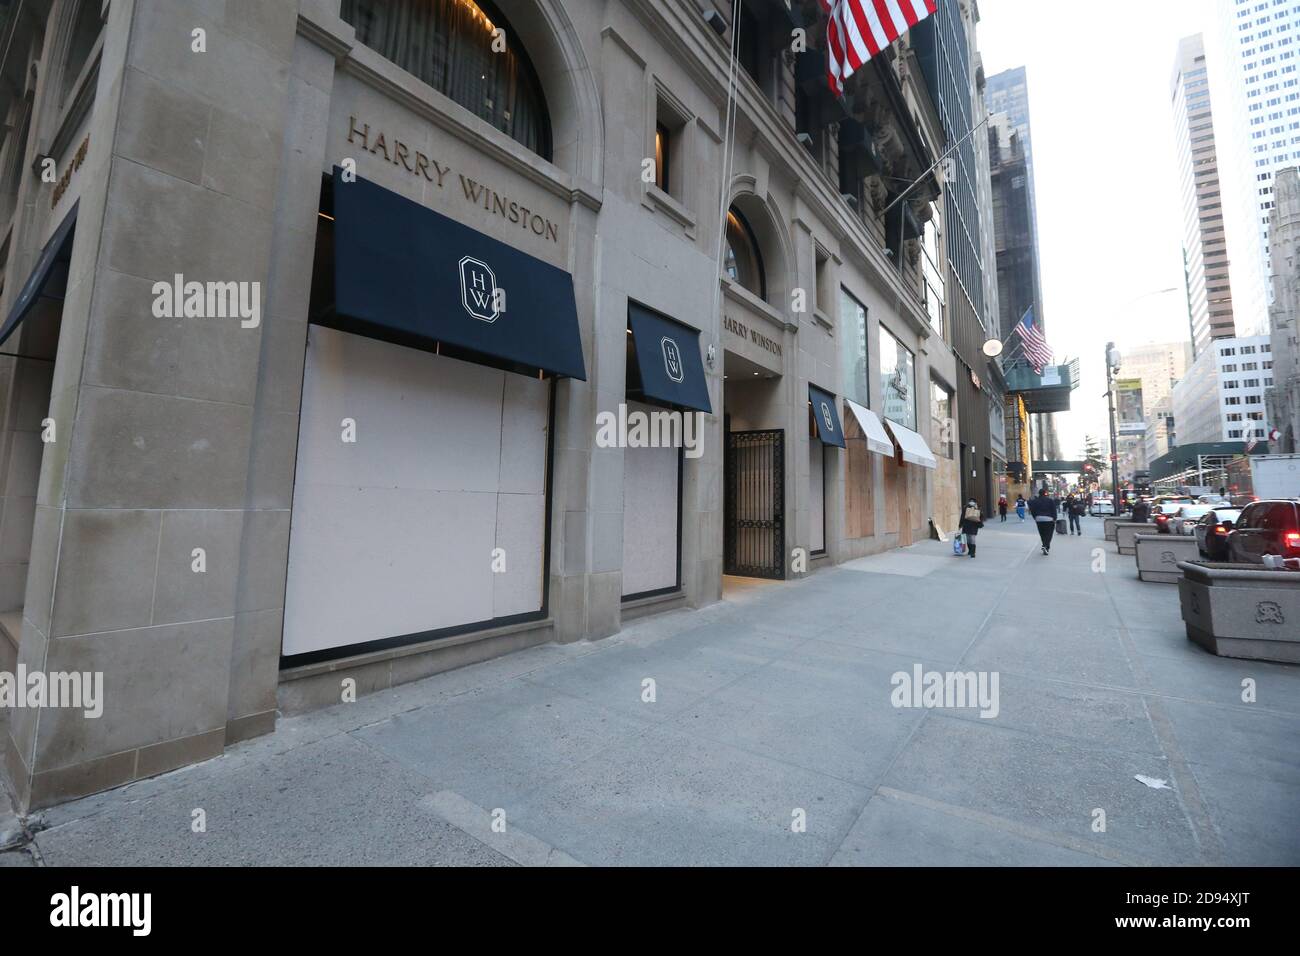 New York, NY, USA. 2nd Nov, 2020. Nov 2, 2020 : New York Stores prepare for possible unrest surrounding election day. Harry Winston Jewelers on 5th Avenue boarded up to prevent looting and vandalism on election day. Credit: Dan Herrick/ZUMA Wire/Alamy Live News Stock Photo